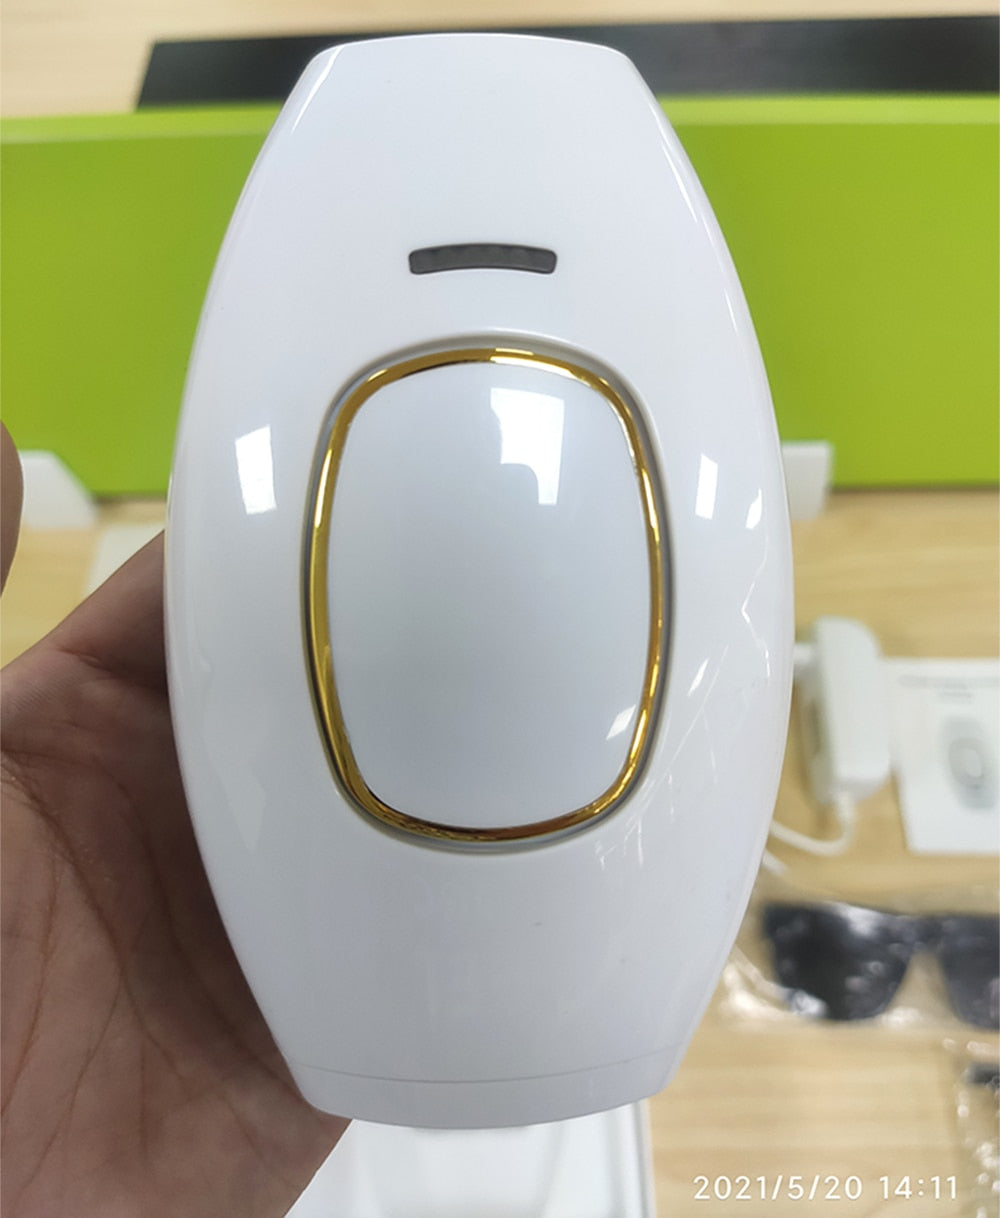 IPL Women and Men at Home Laser Hair Removal Handset